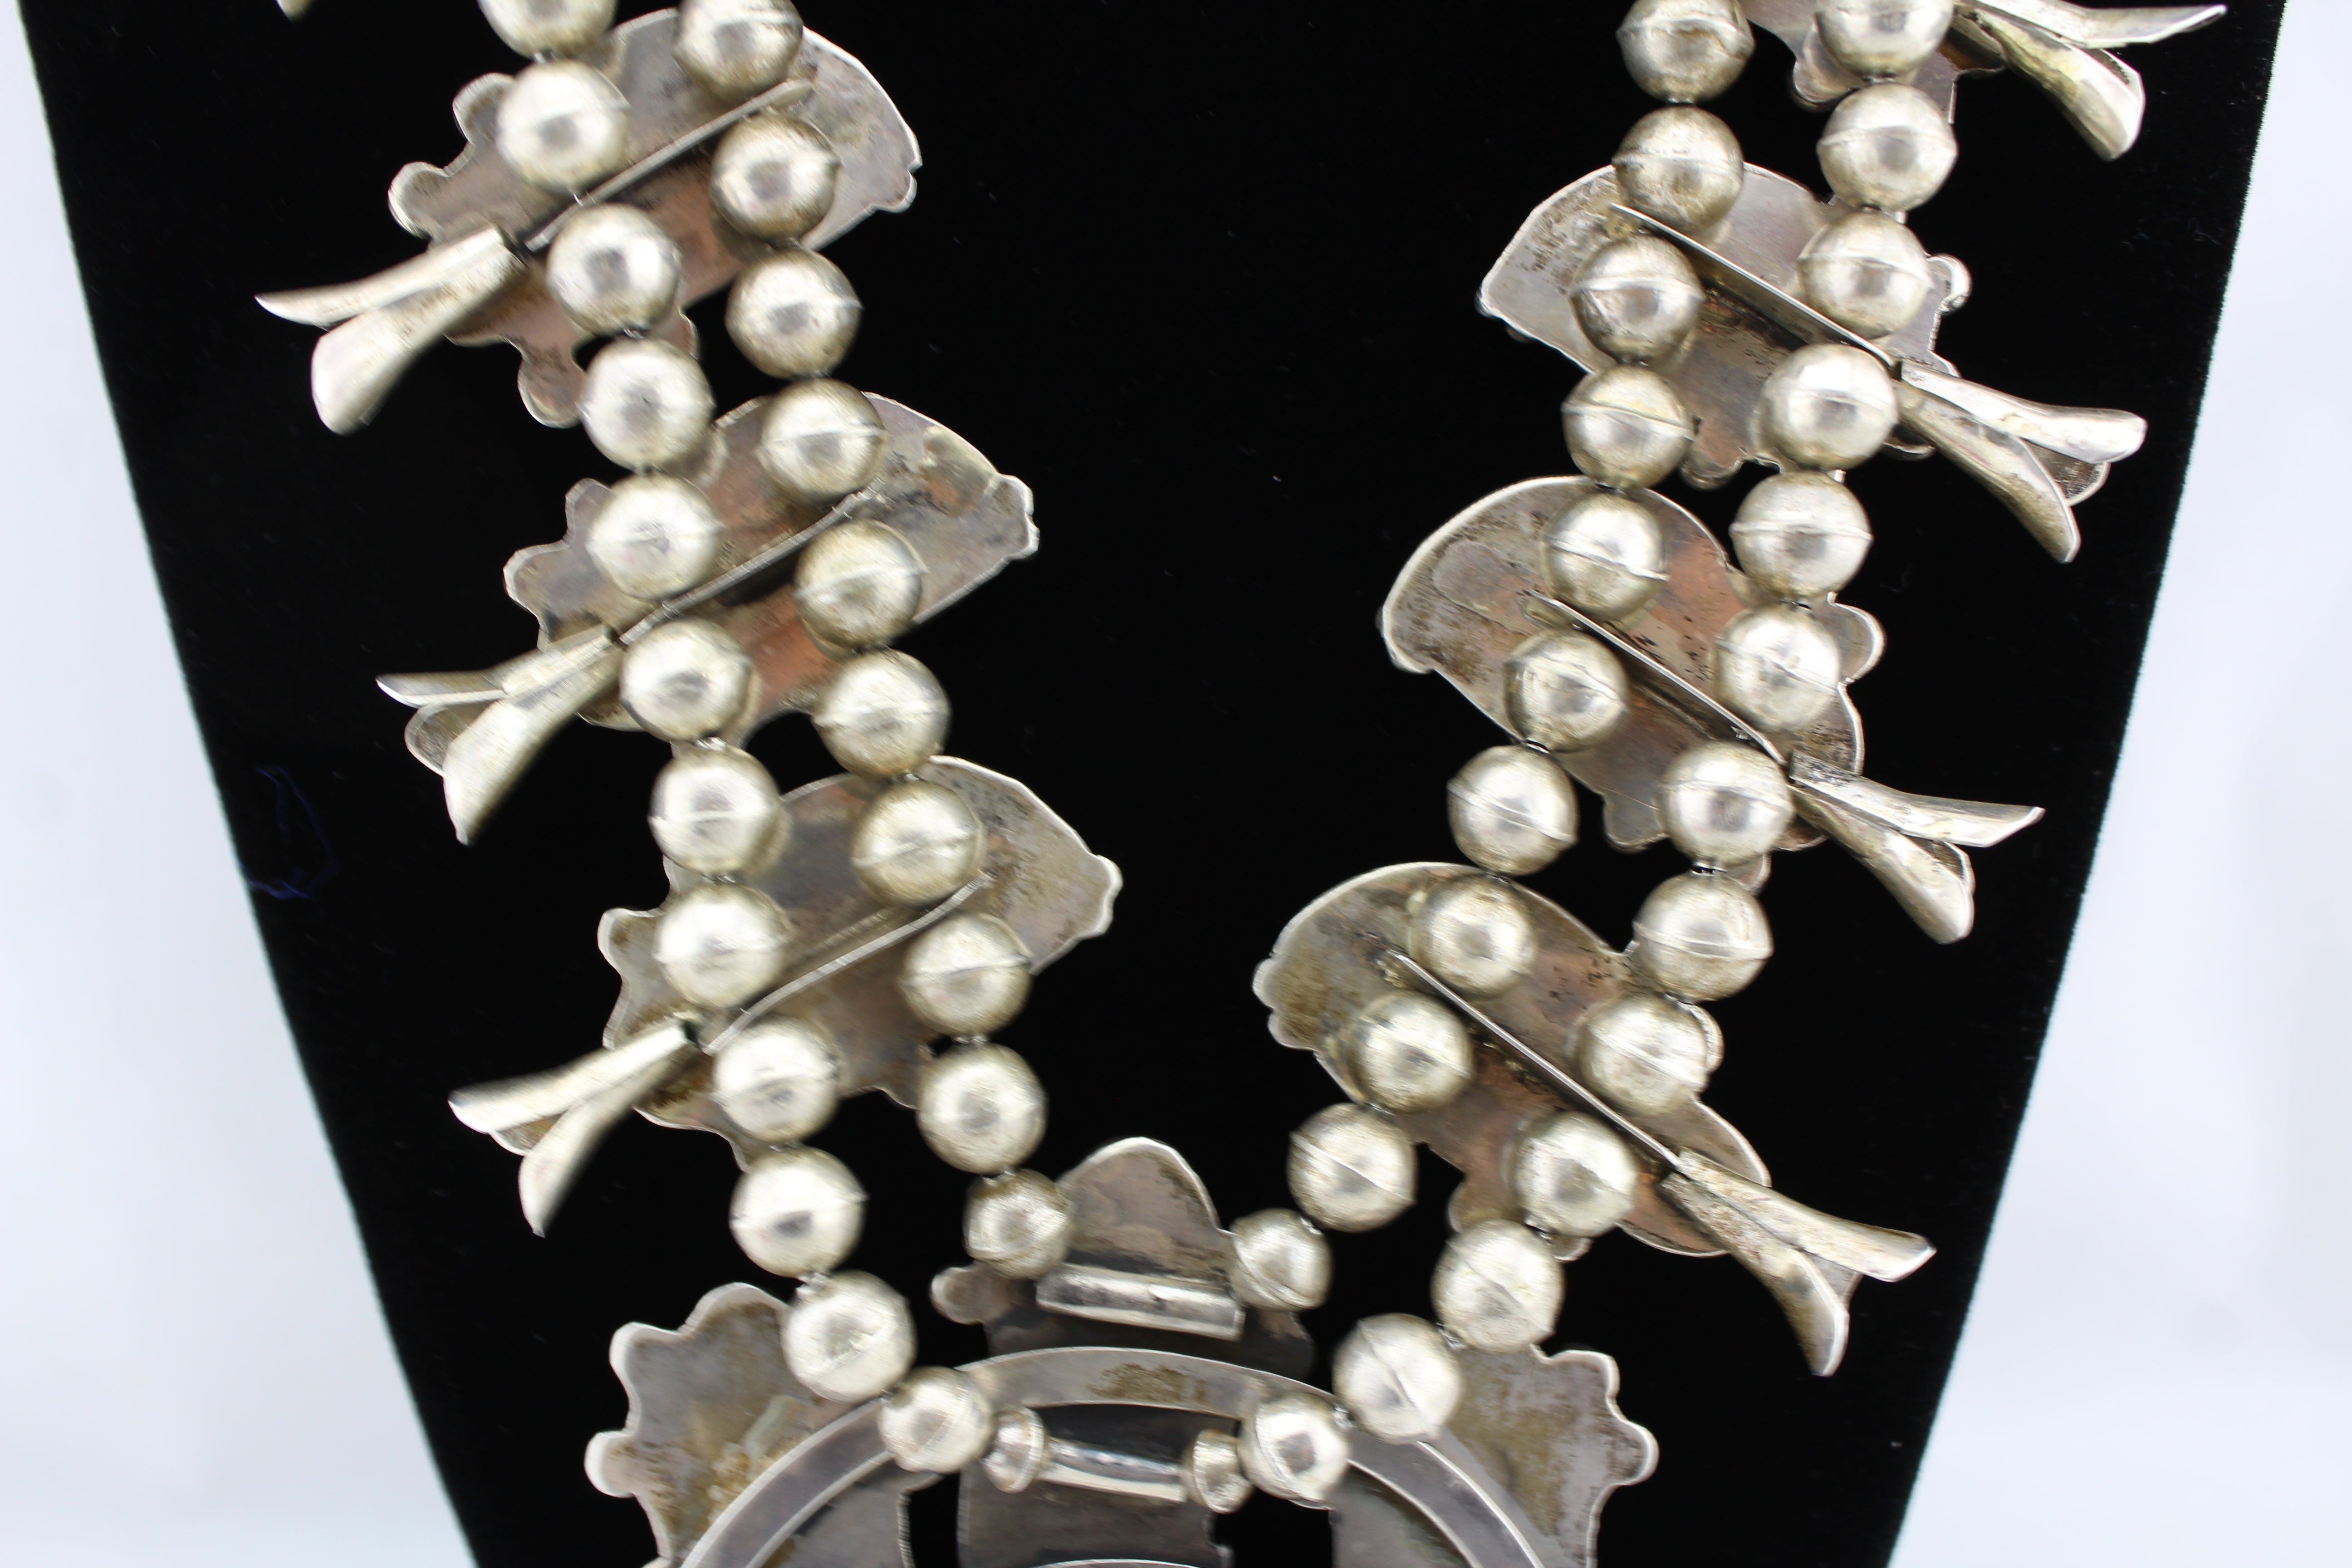 1940-50s Bisbee Sterling Silver Squashblossom Necklace